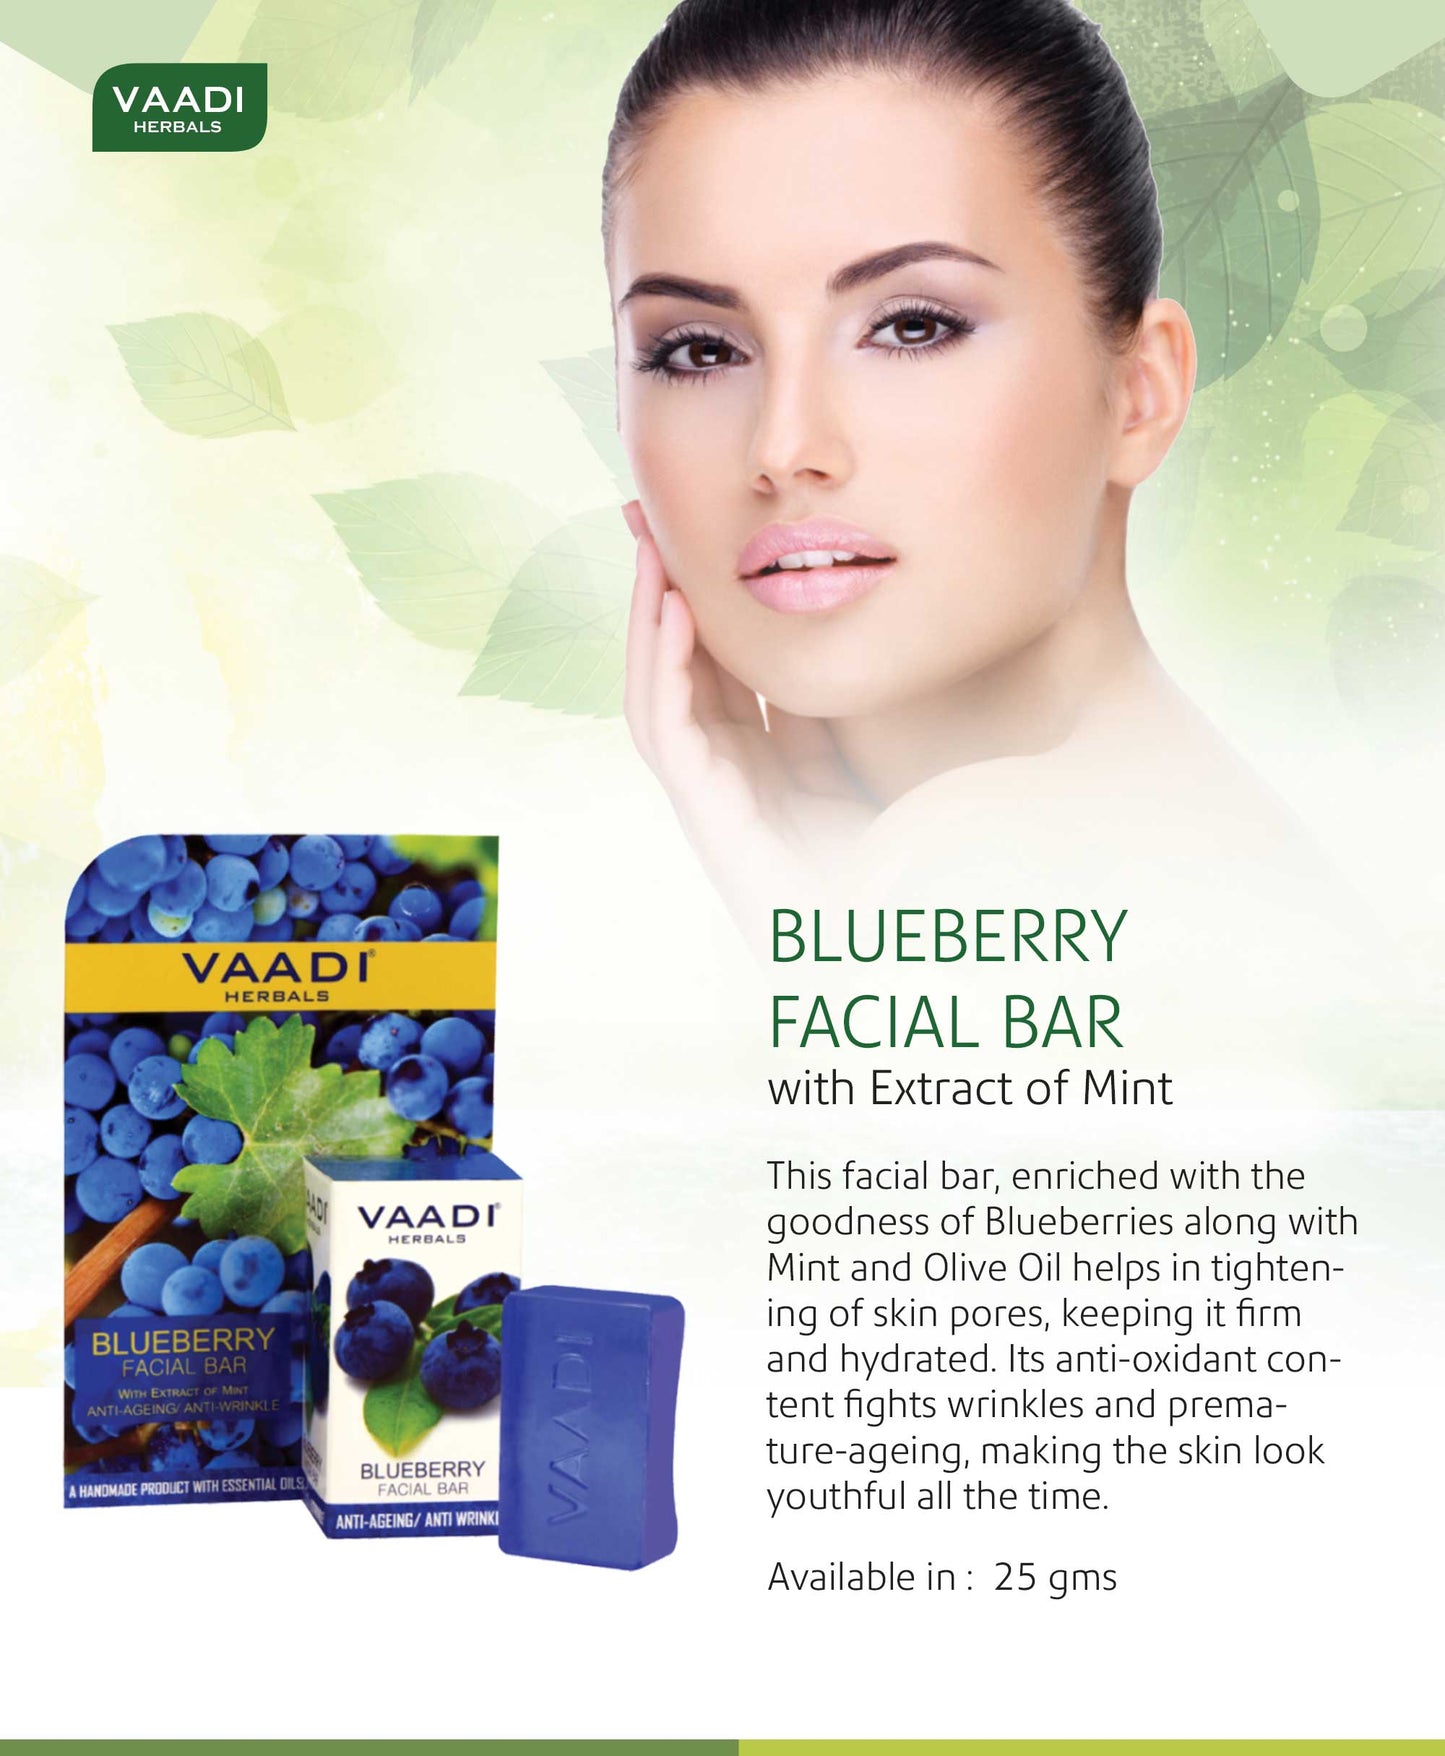 Organic Blueberry Facial Bar with Mint Extract & Olive Oil - Prevents Wrinkles (25 gms/0.9 oz)